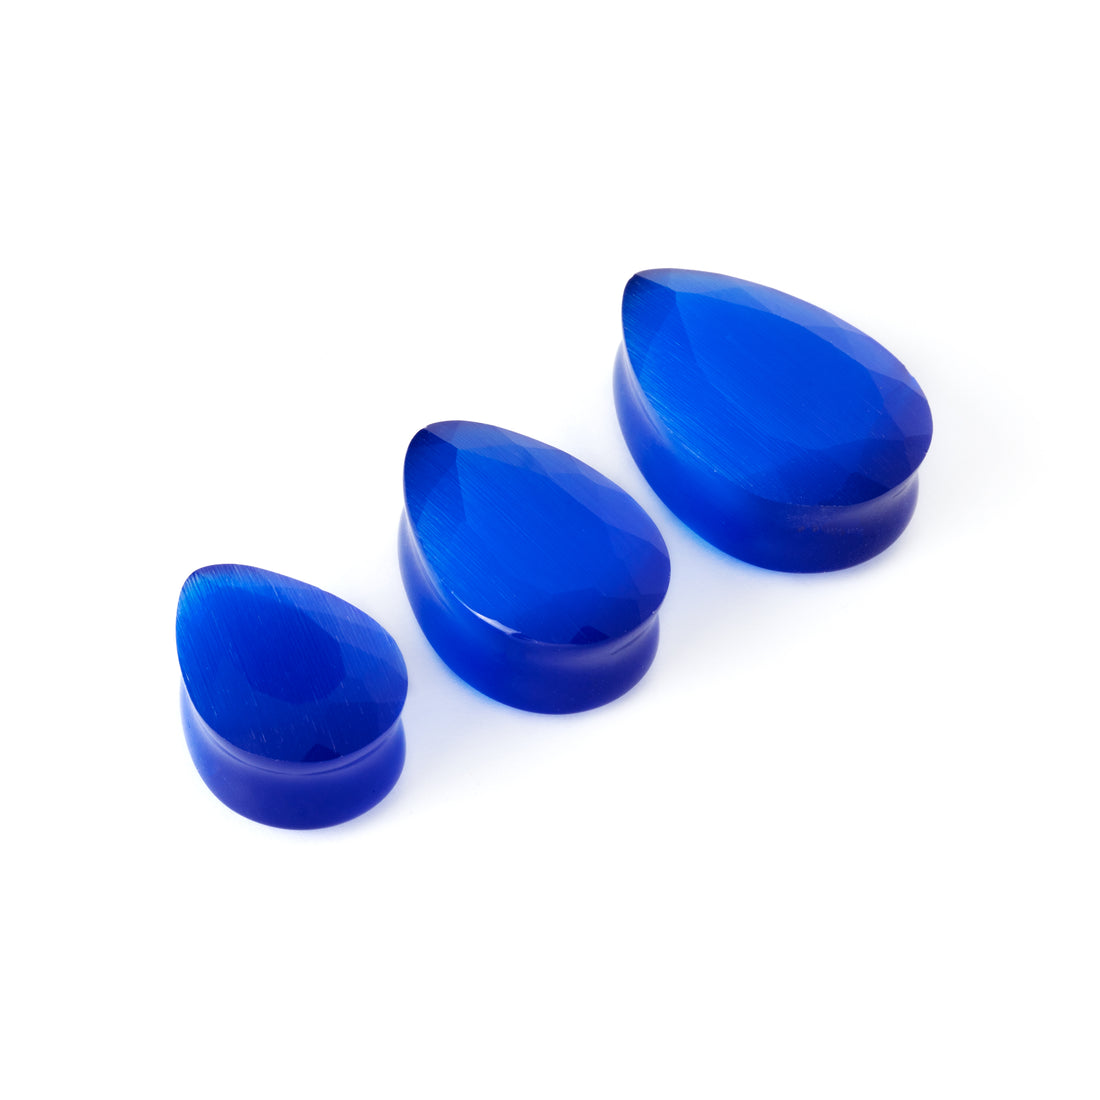 different sizes of blue cat eye teardrop faceted ear plugs side view